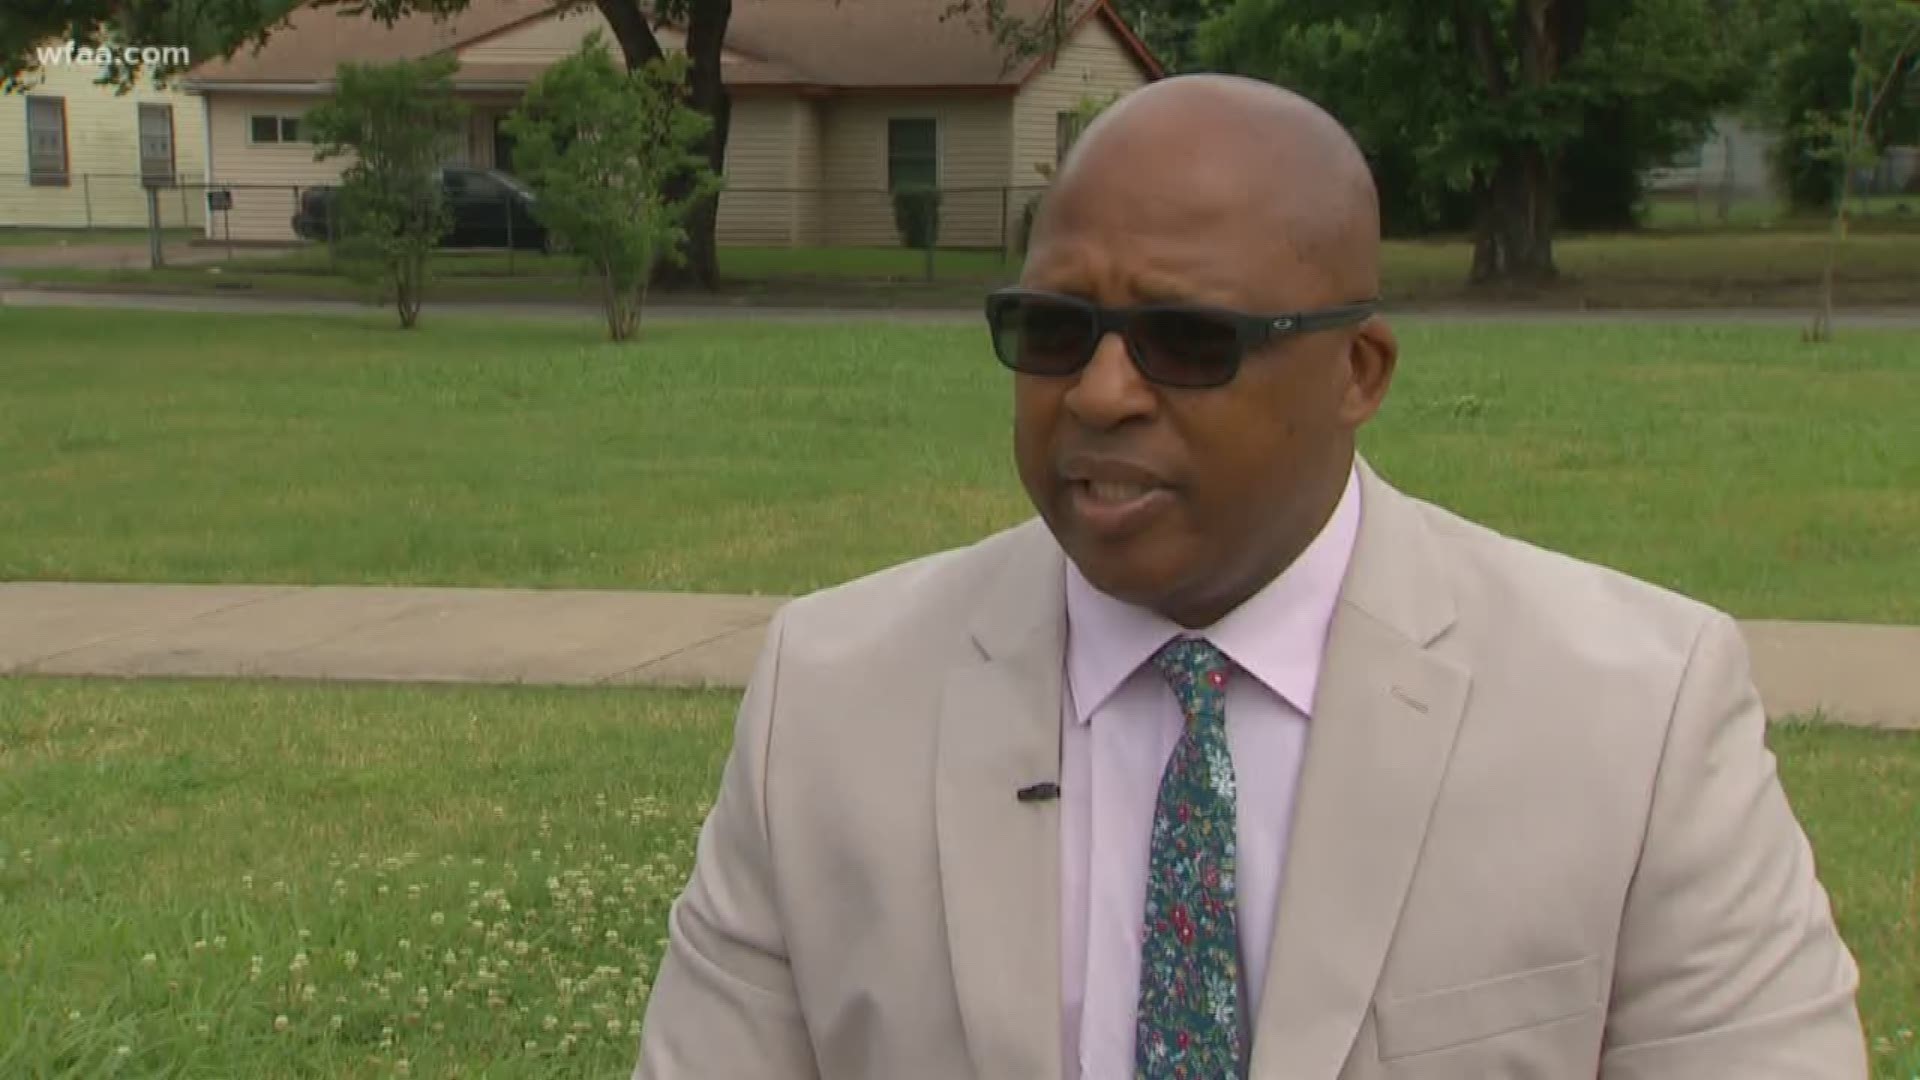 Dallas has a new Code Services director, and he's walking the streets with a message he hopes will clean up the City.